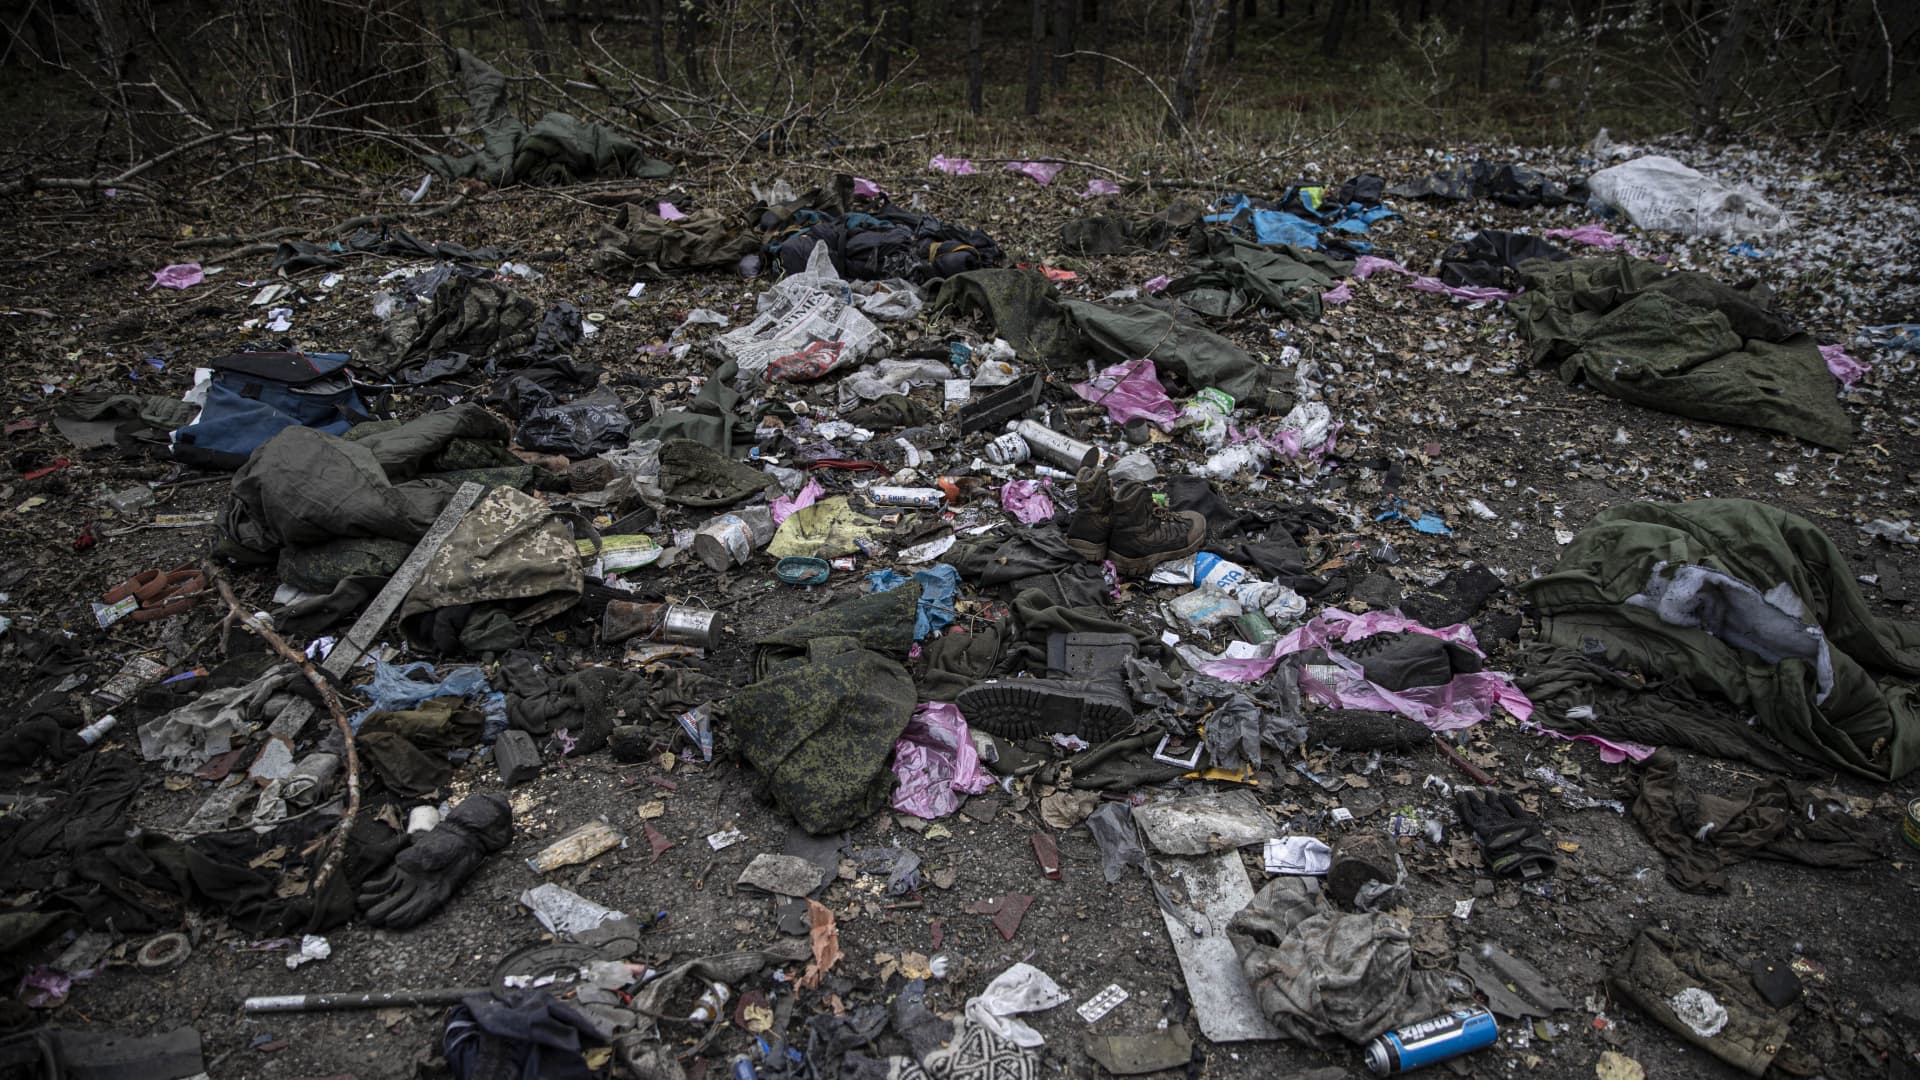 A view of remains belonging to Russian forces after Russian forces withdrawn from the city of Lyman in the Donetsk region (Donetsk Oblast), Ukraine on October 05, 202.